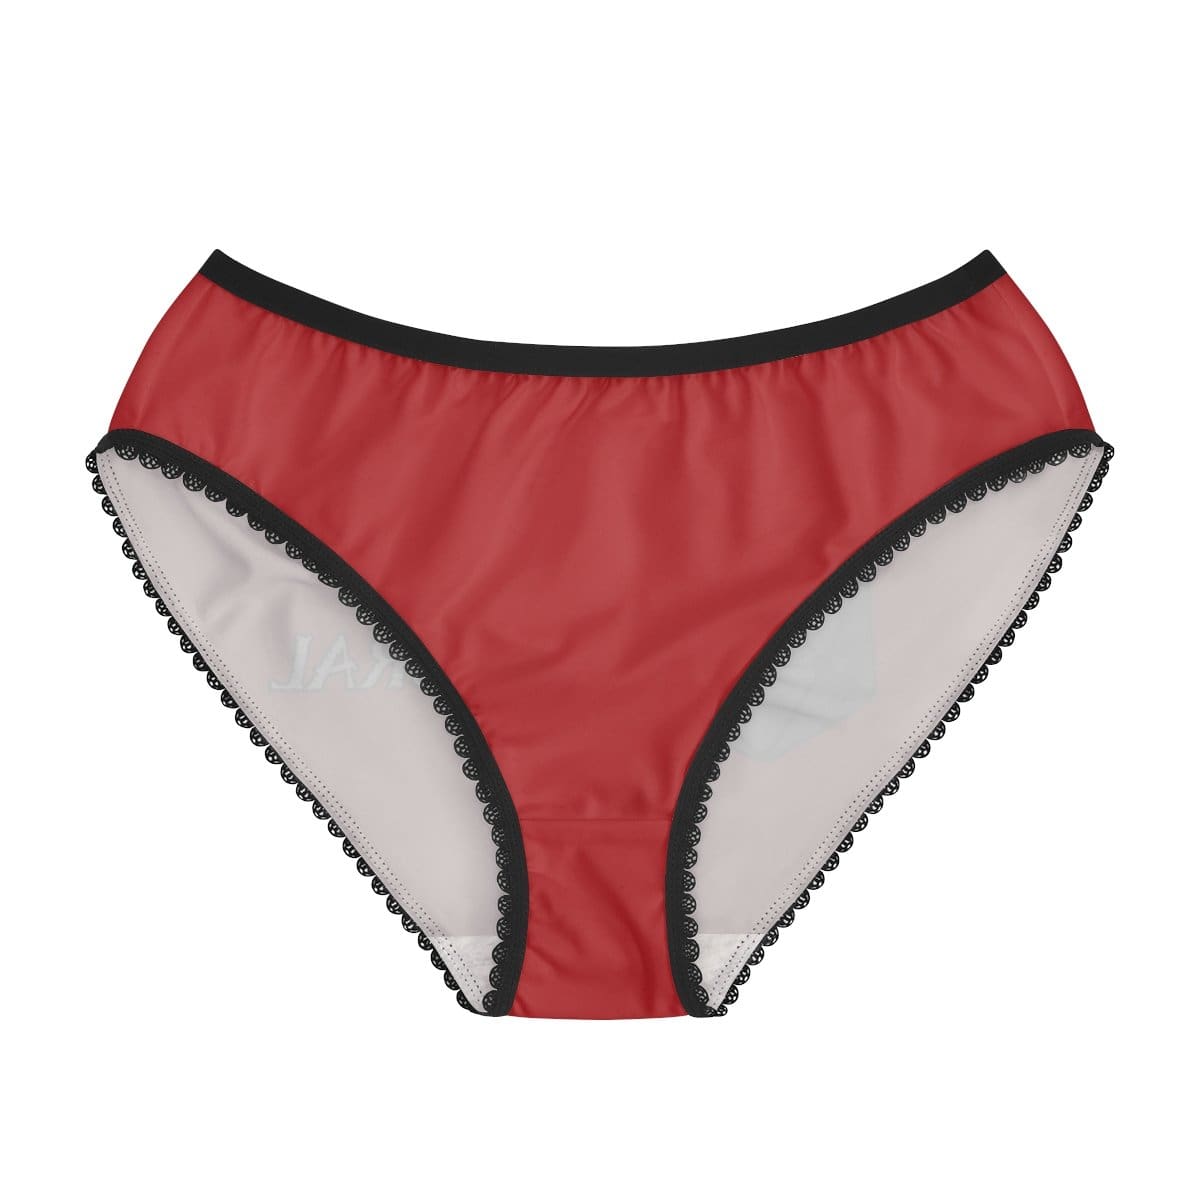  Red D20 Dice Women's Underwear Low Rise Stretch